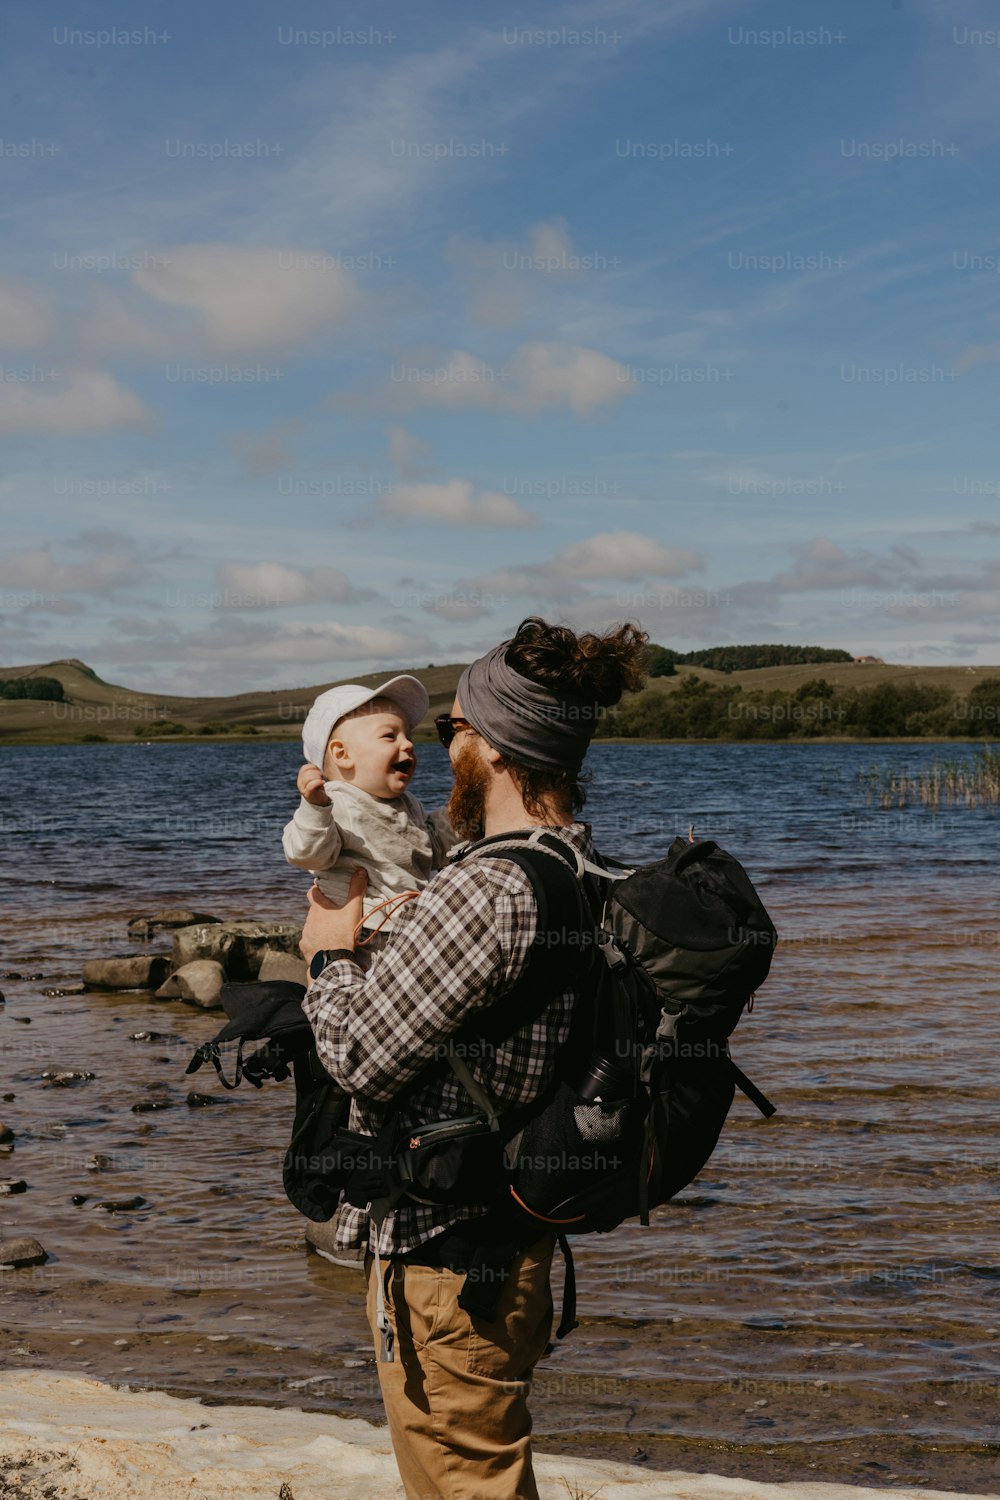 a man holding a baby while standing next to a body of water